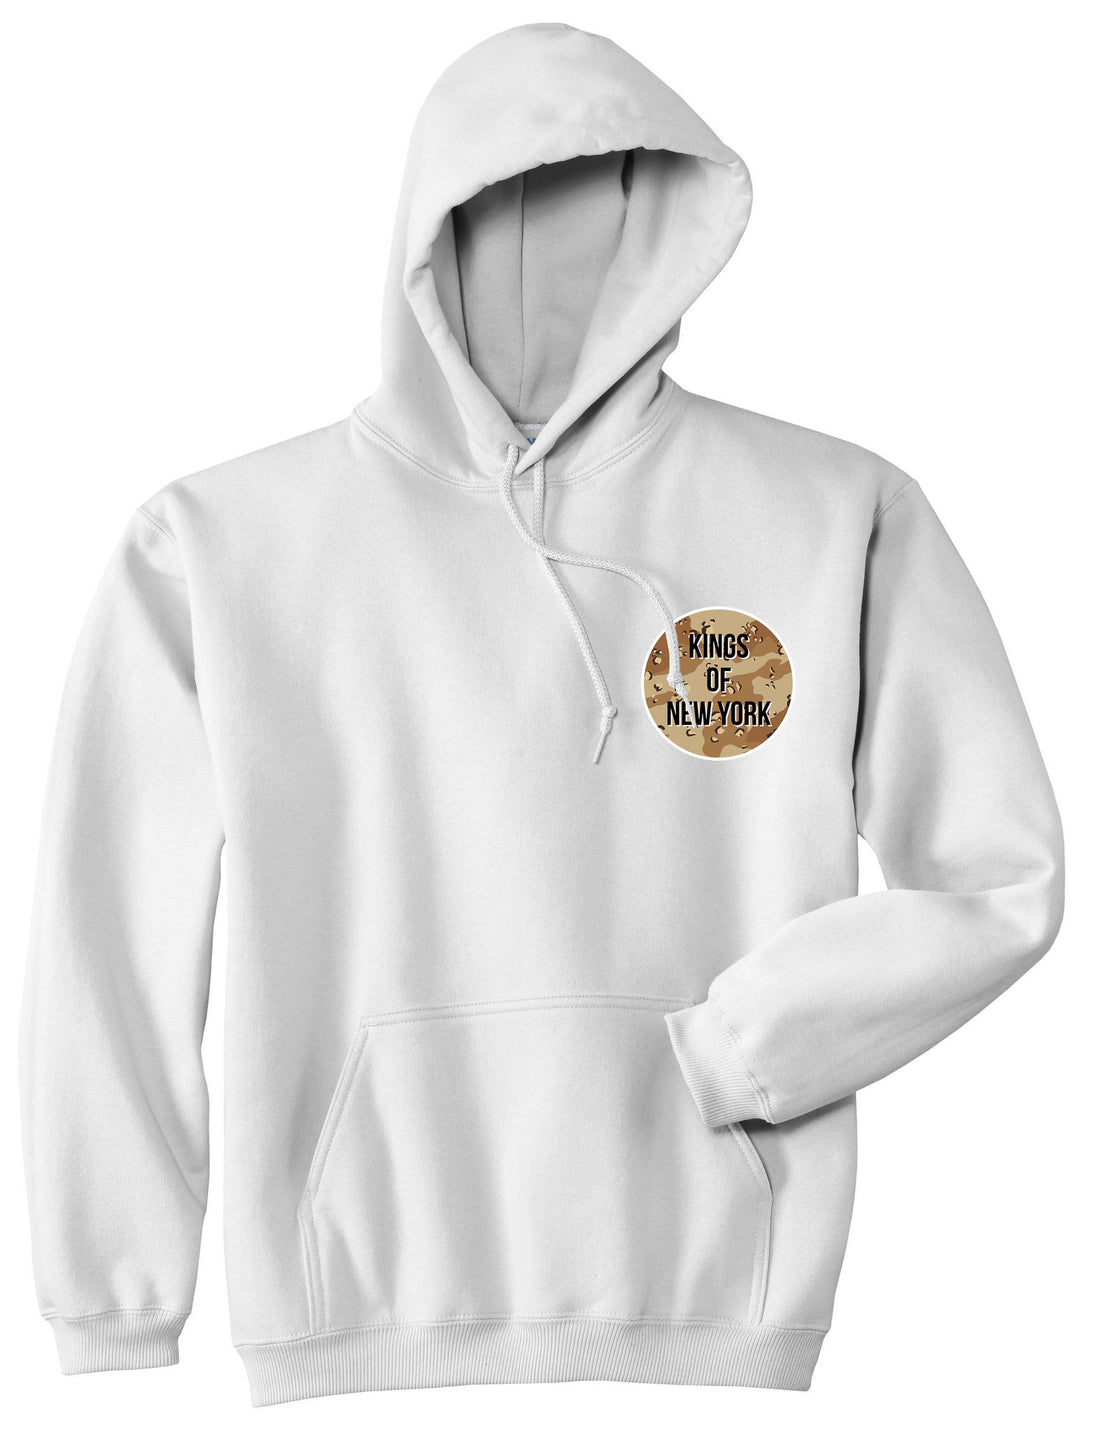 ARMY Desert Camo Pullover Hoodie Hoody in White